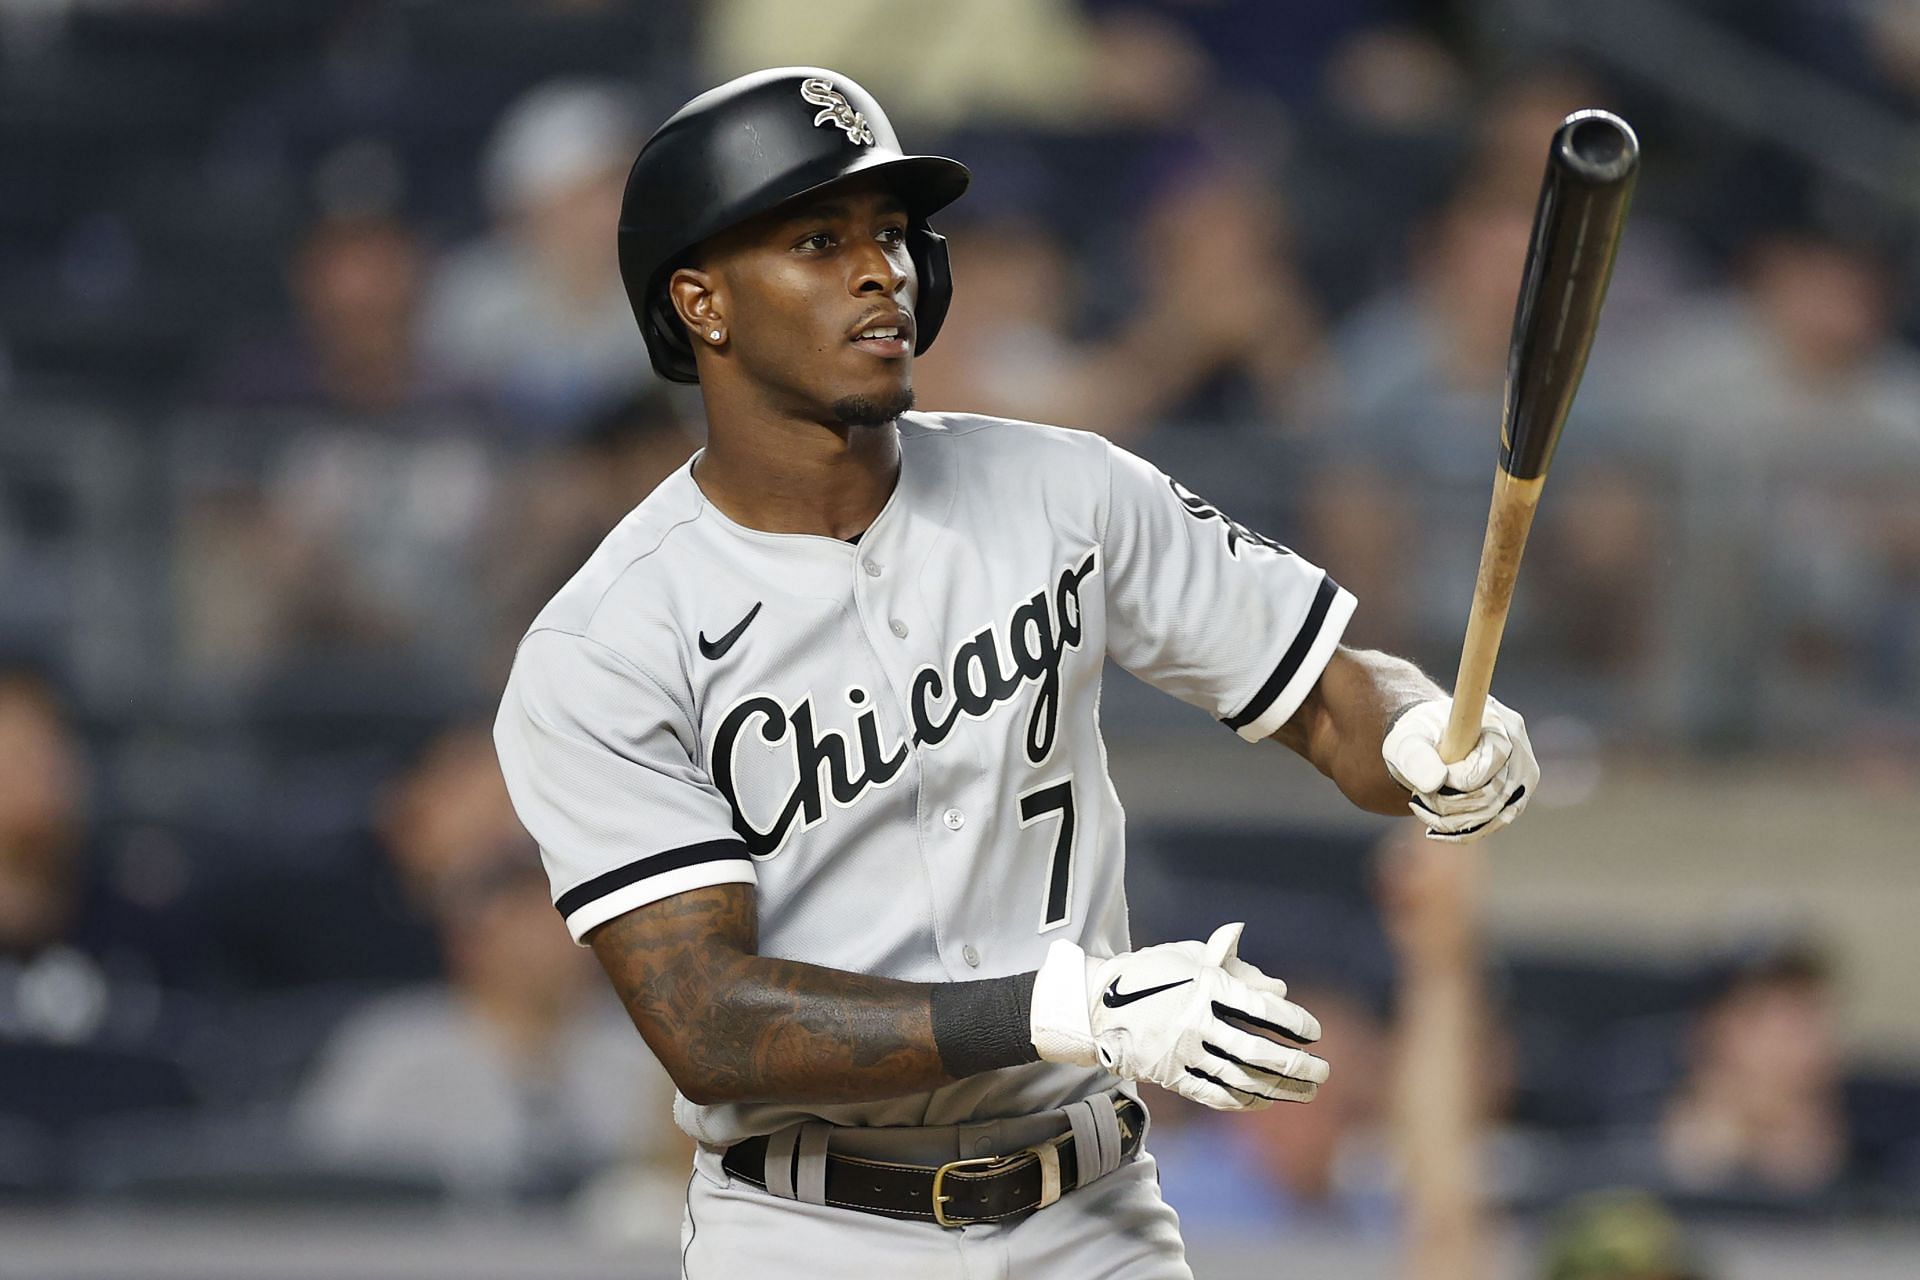 "Tim Anderson can go f**k himself" Outrage on Twitter as Chicago